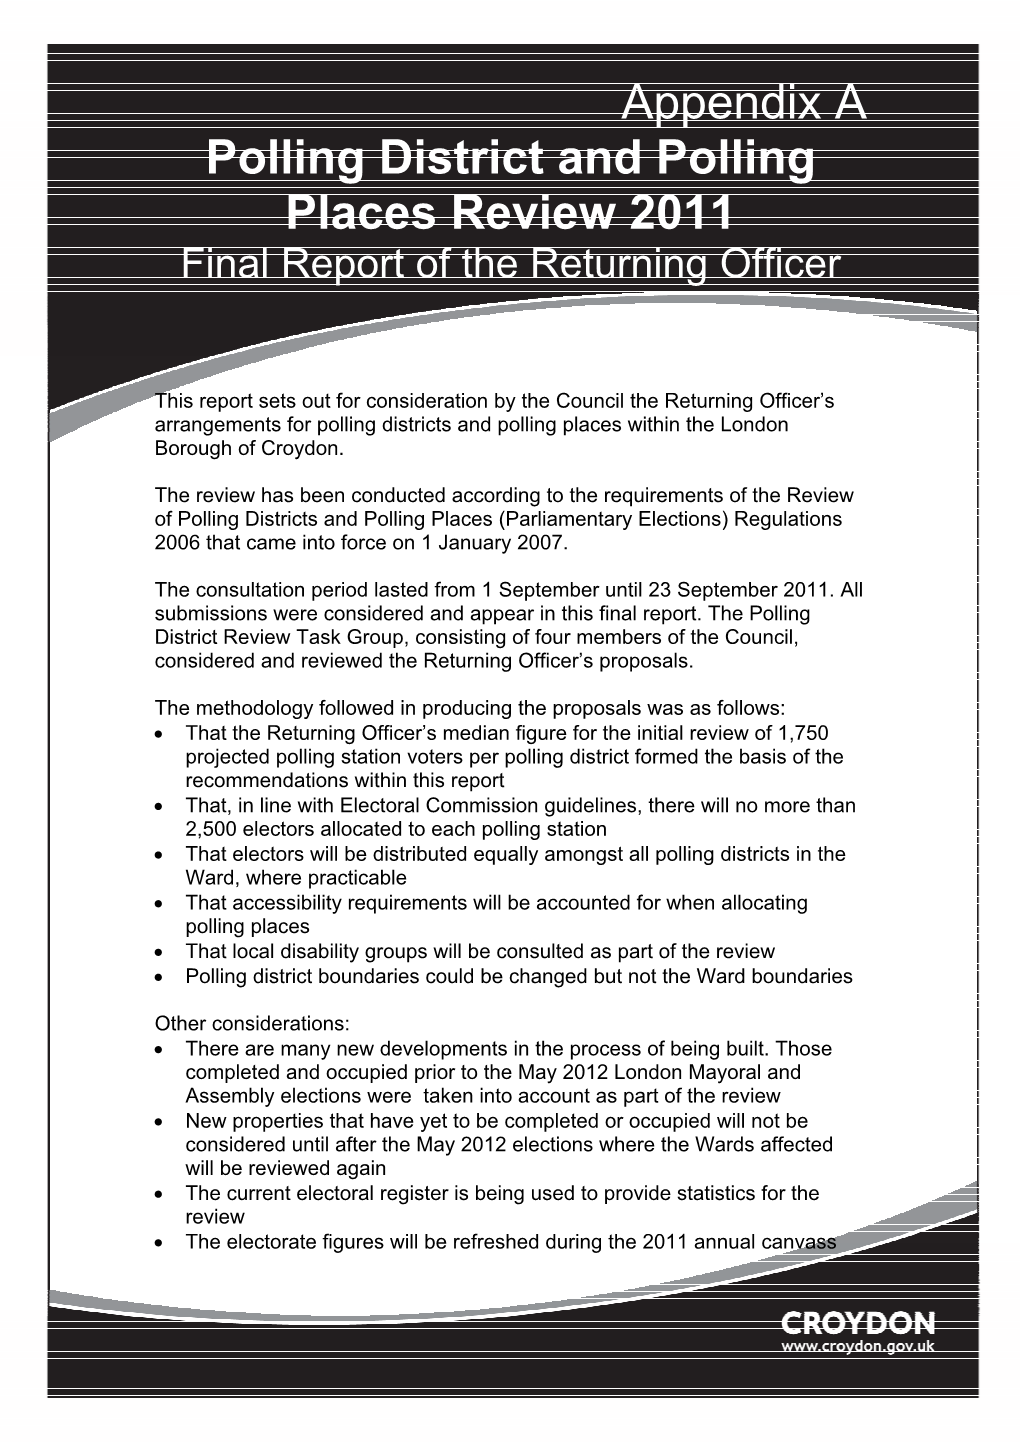 Polling District and Polling Places Review 2011 Final Report of the Returning Officer